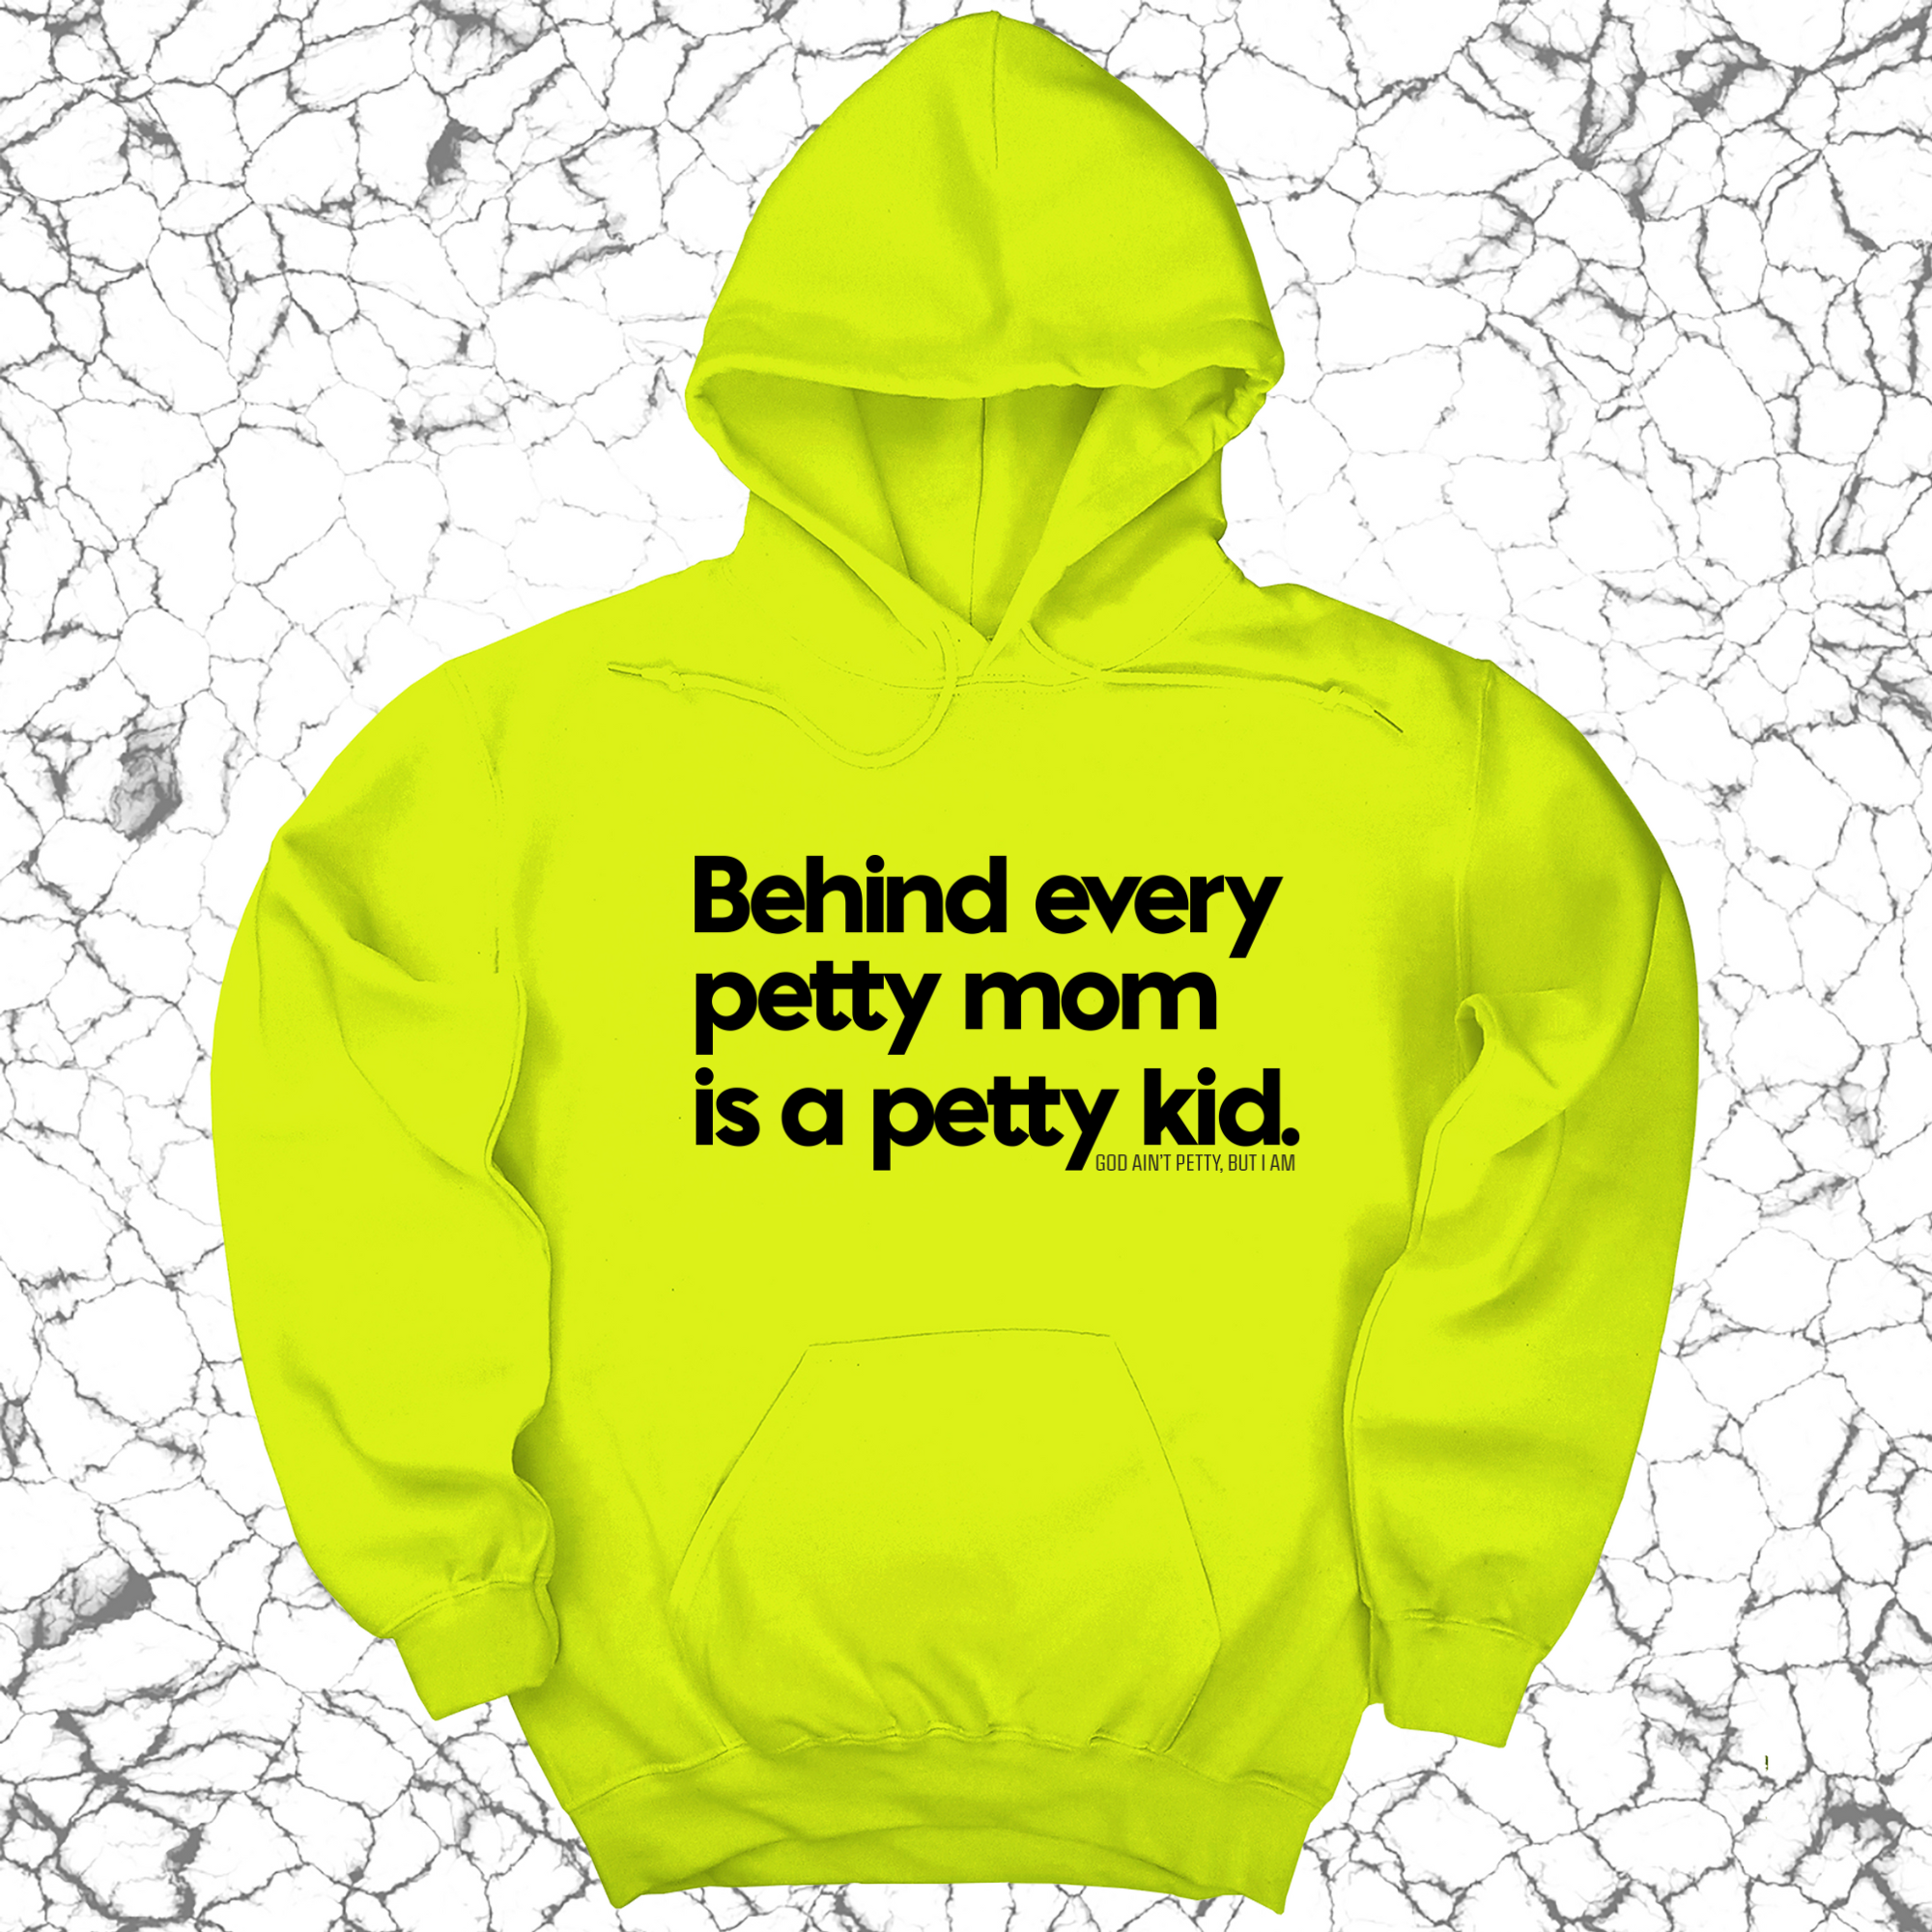 Behind every petty mom is a petty kid Unisex Hoodie-Hoodie-The Original God Ain't Petty But I Am